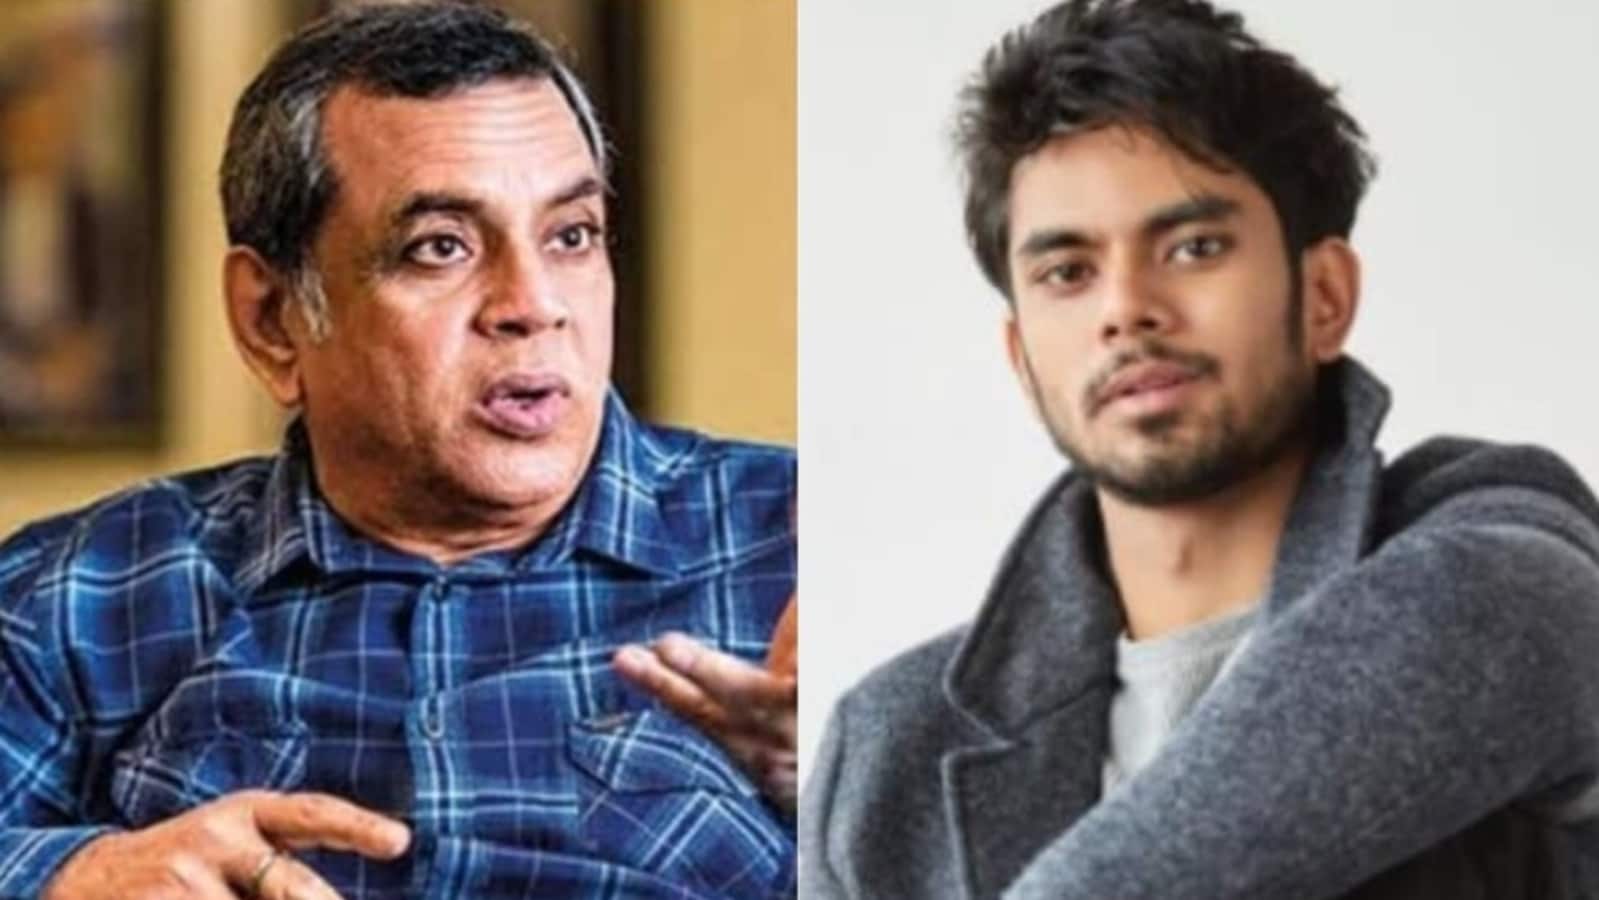 Aditya Rawal says ‘son of Paresh Rawal will cease showing in parenthesis’ subsequent to his title after a couple of initiatives